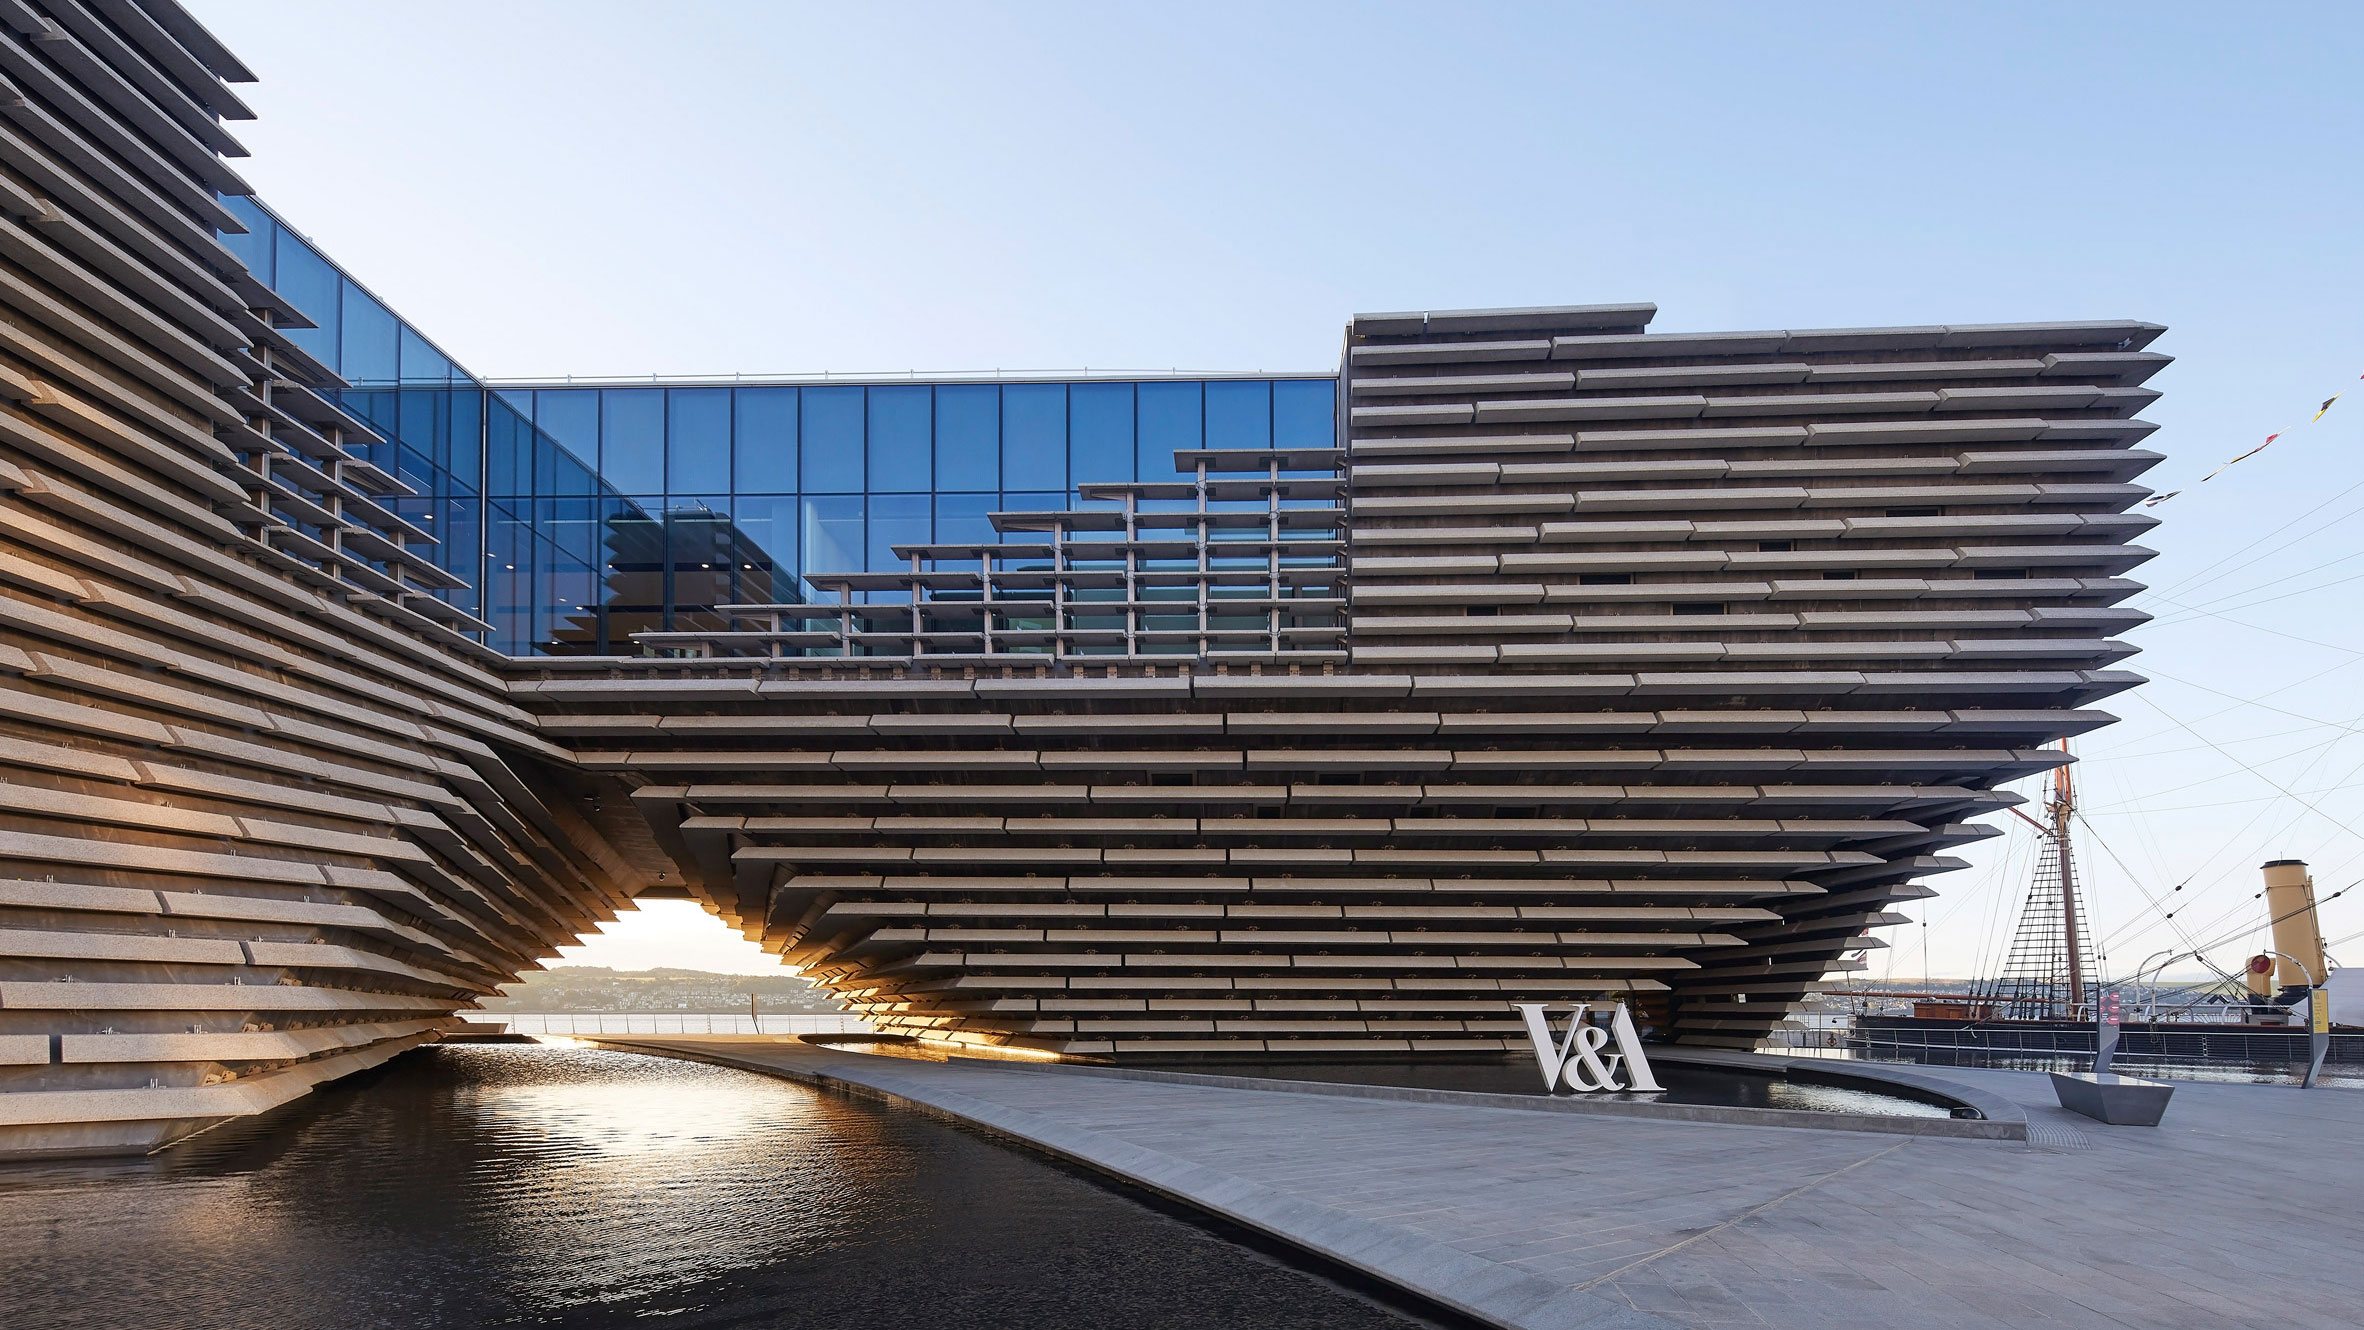 Time magazine's World's Greatest Places of 2019: V&A Dundee by Kengo Kuma